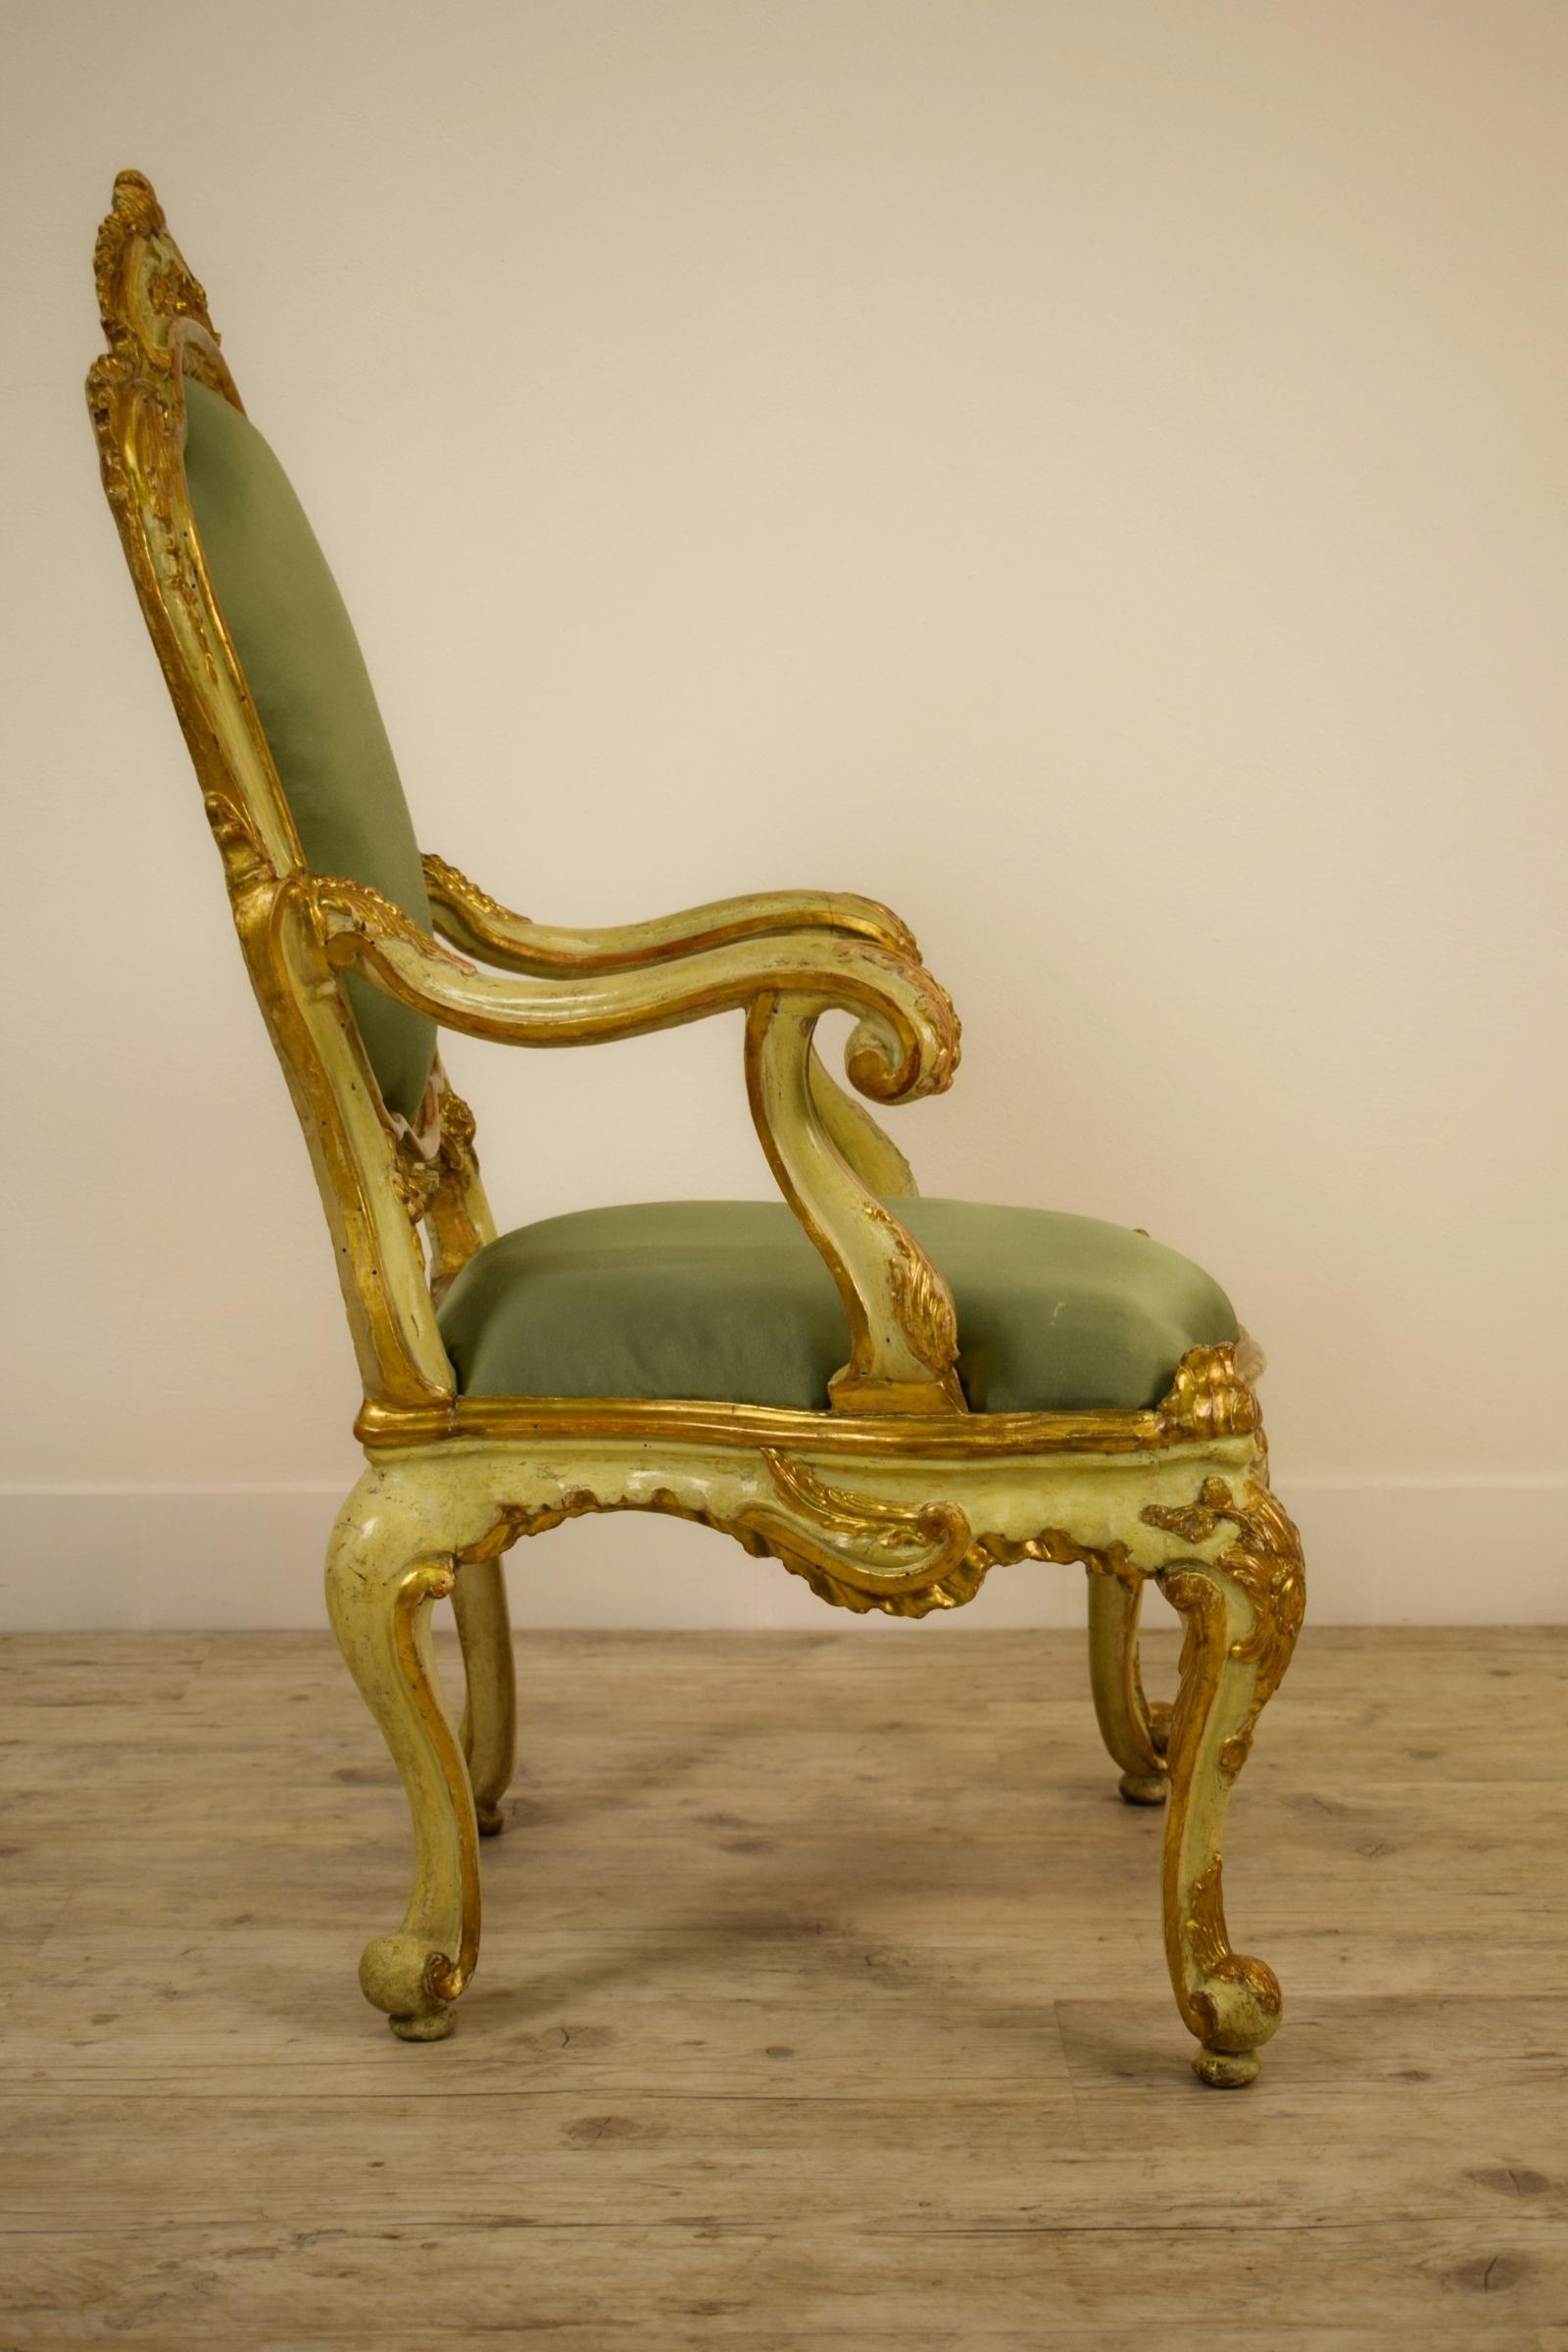 18th Century Venetian Lacquered and Gilded Wood Armchair (Hartholz)